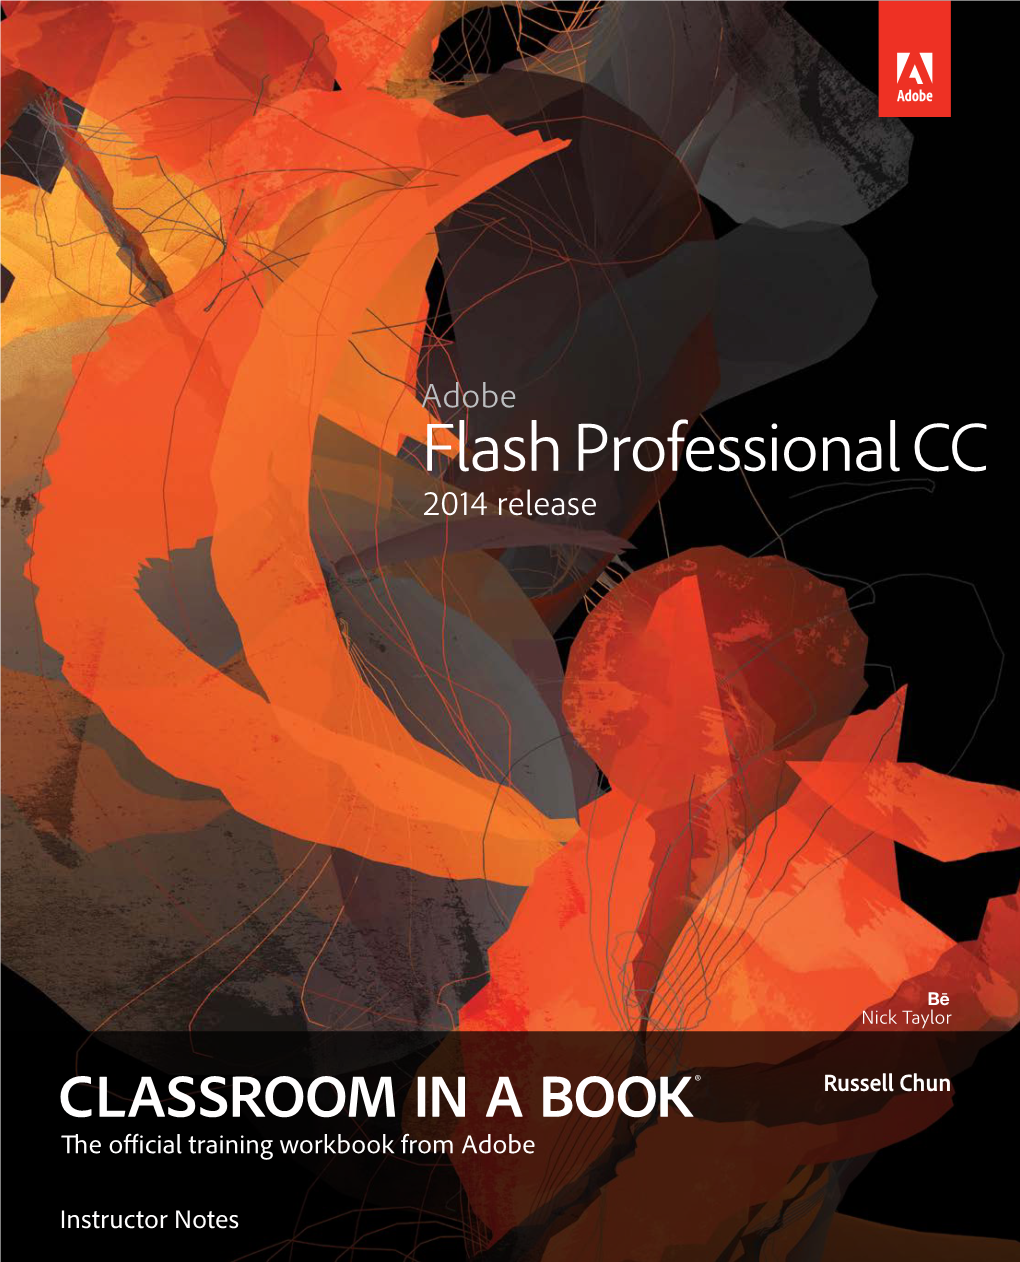 Adobe Flash Professional CC (2014 Release) Uses Actionscript 3.0, the Scripting Language That Extends Flash Functionality and Enables Interactivity in Flash Projects